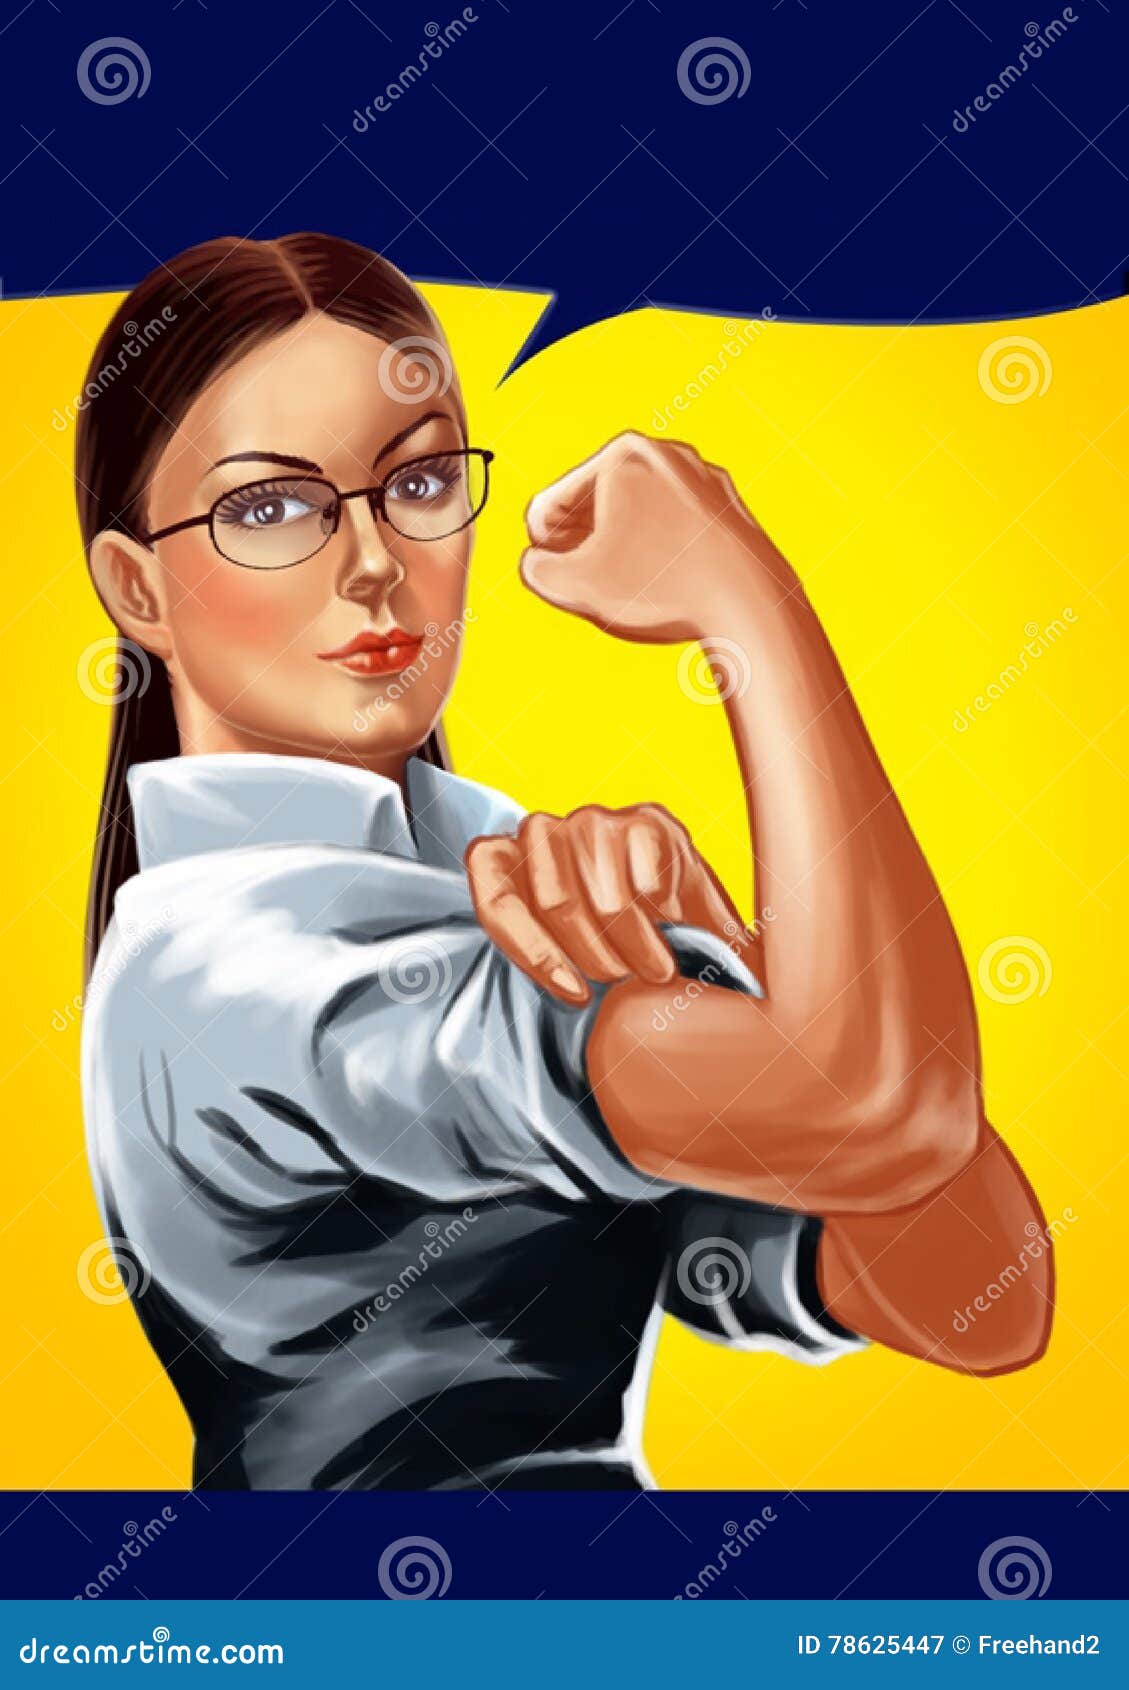 Strong Arm Stock Illustrations – 26,788 Strong Arm Stock Illustrations,  Vectors & Clipart - Dreamstime